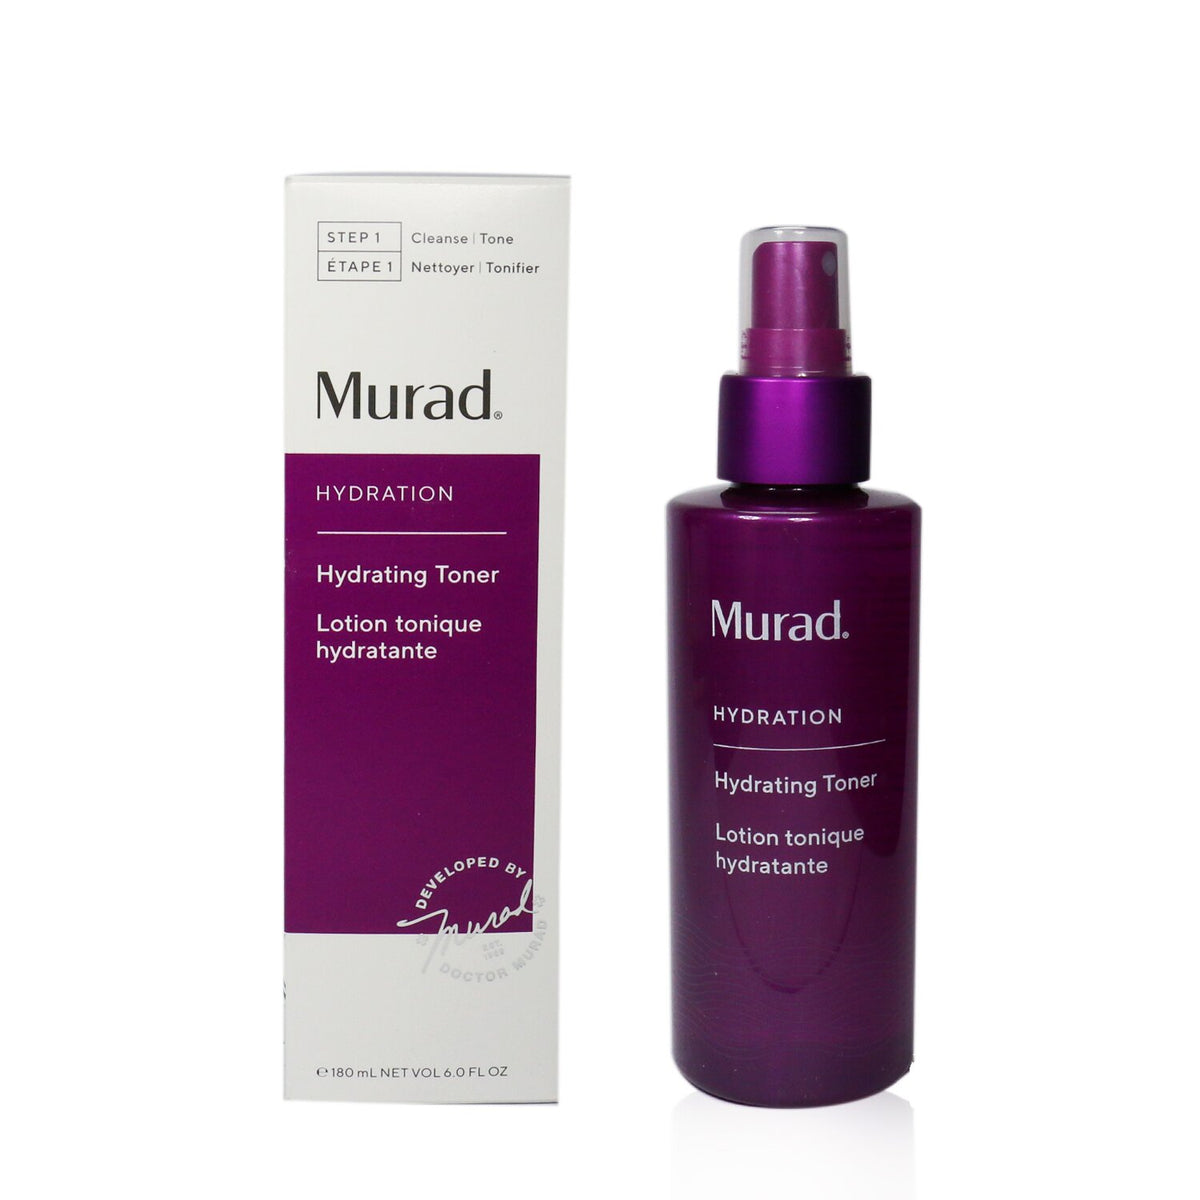 Hydrating Toner for Sale Skincare, Now Author